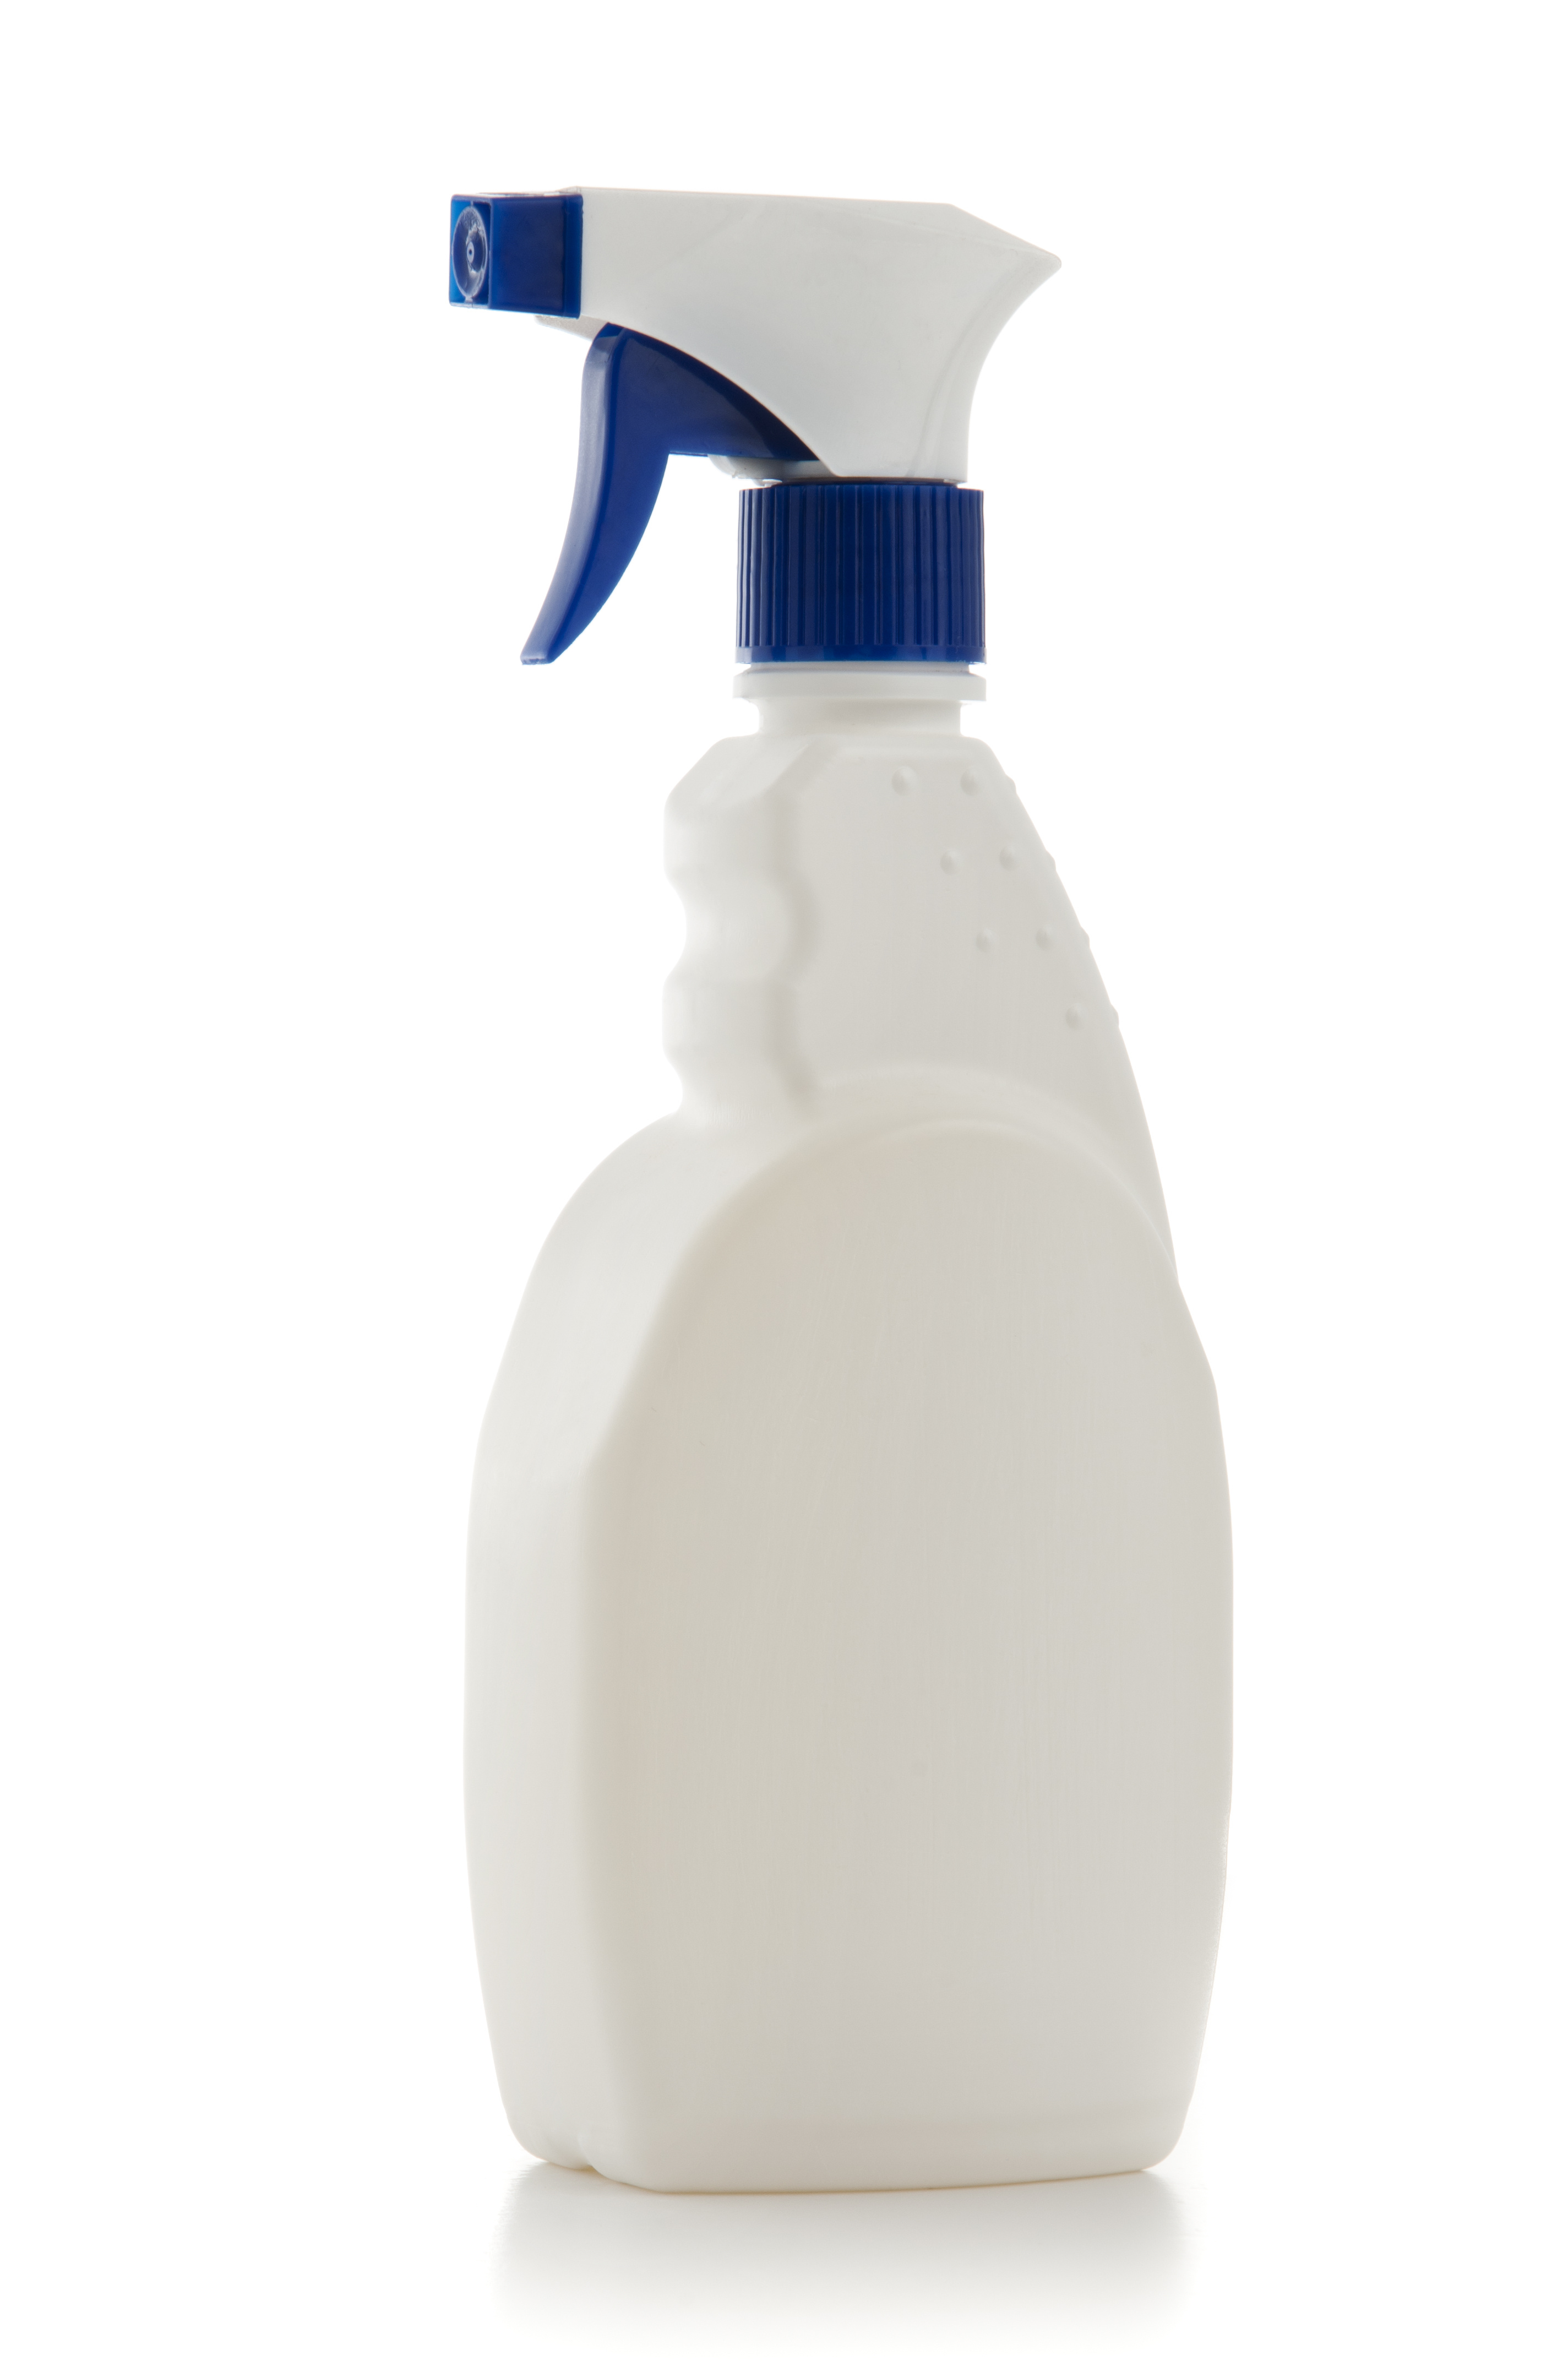 General Purpose Cleaners | About Cleaning Products